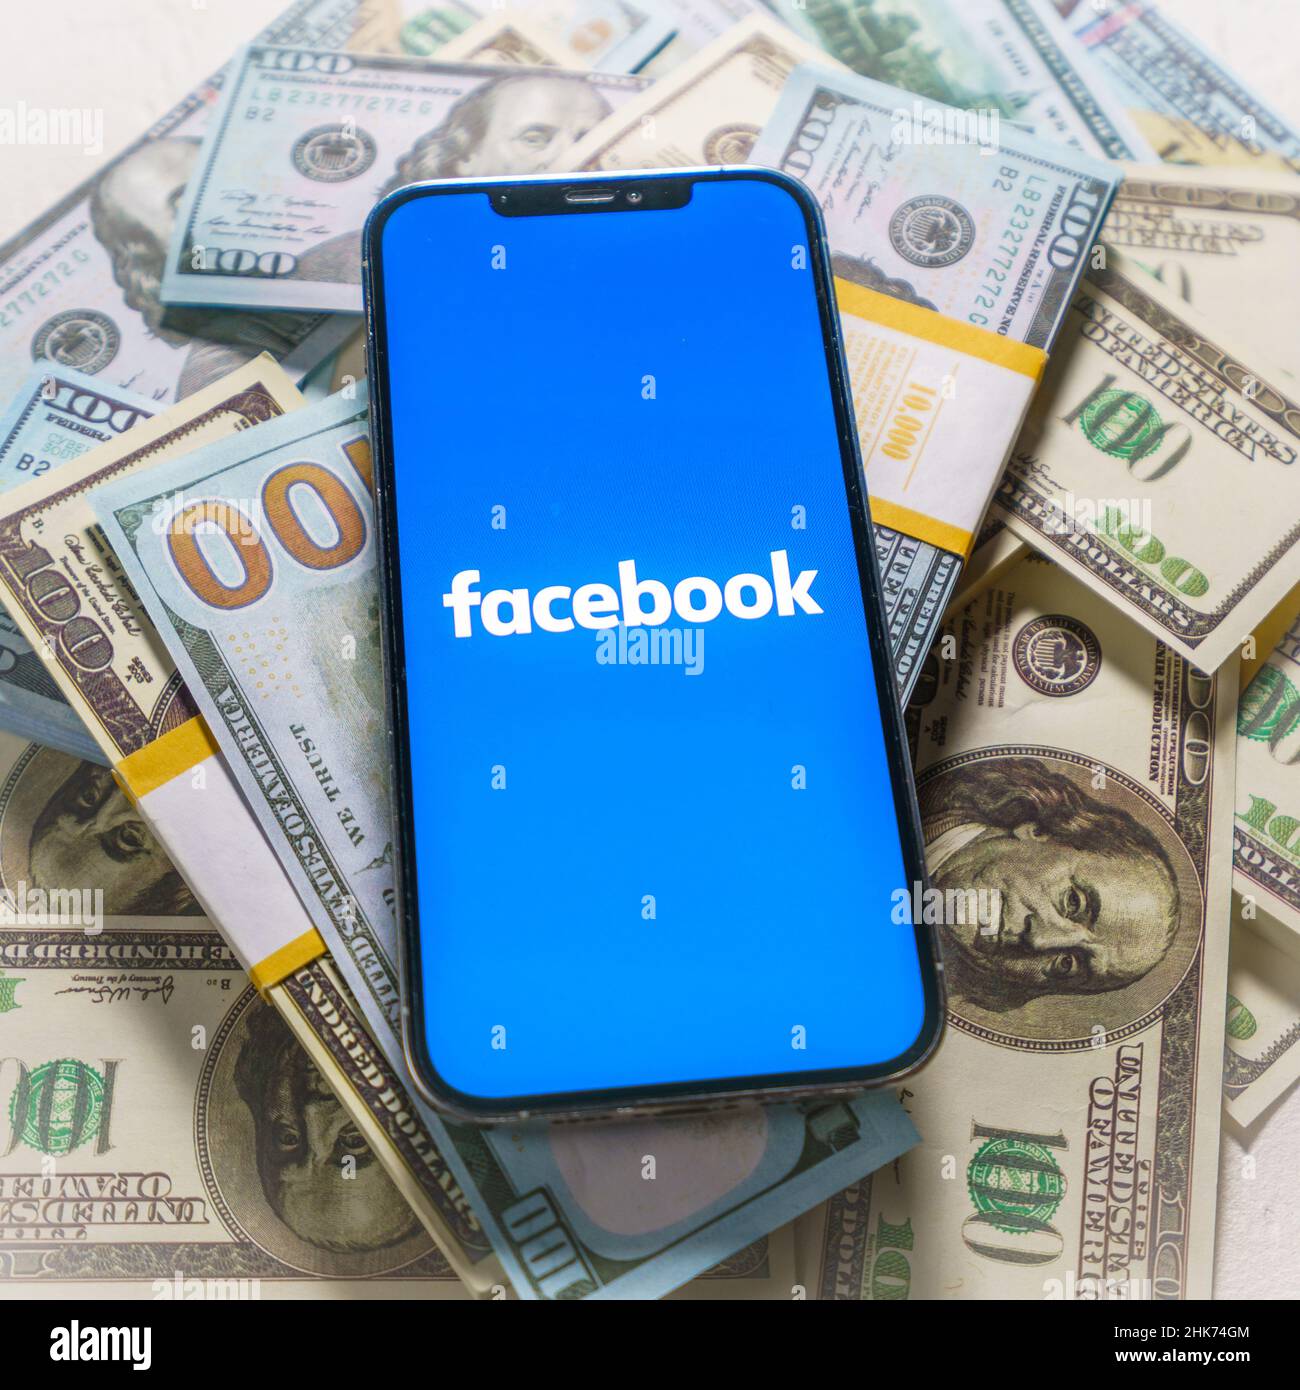 Berlin, Germany - February 02, 2022: iPhone 12 Pro Max with FACEBOOK META company logo placed on US dollar bills Stock Photo